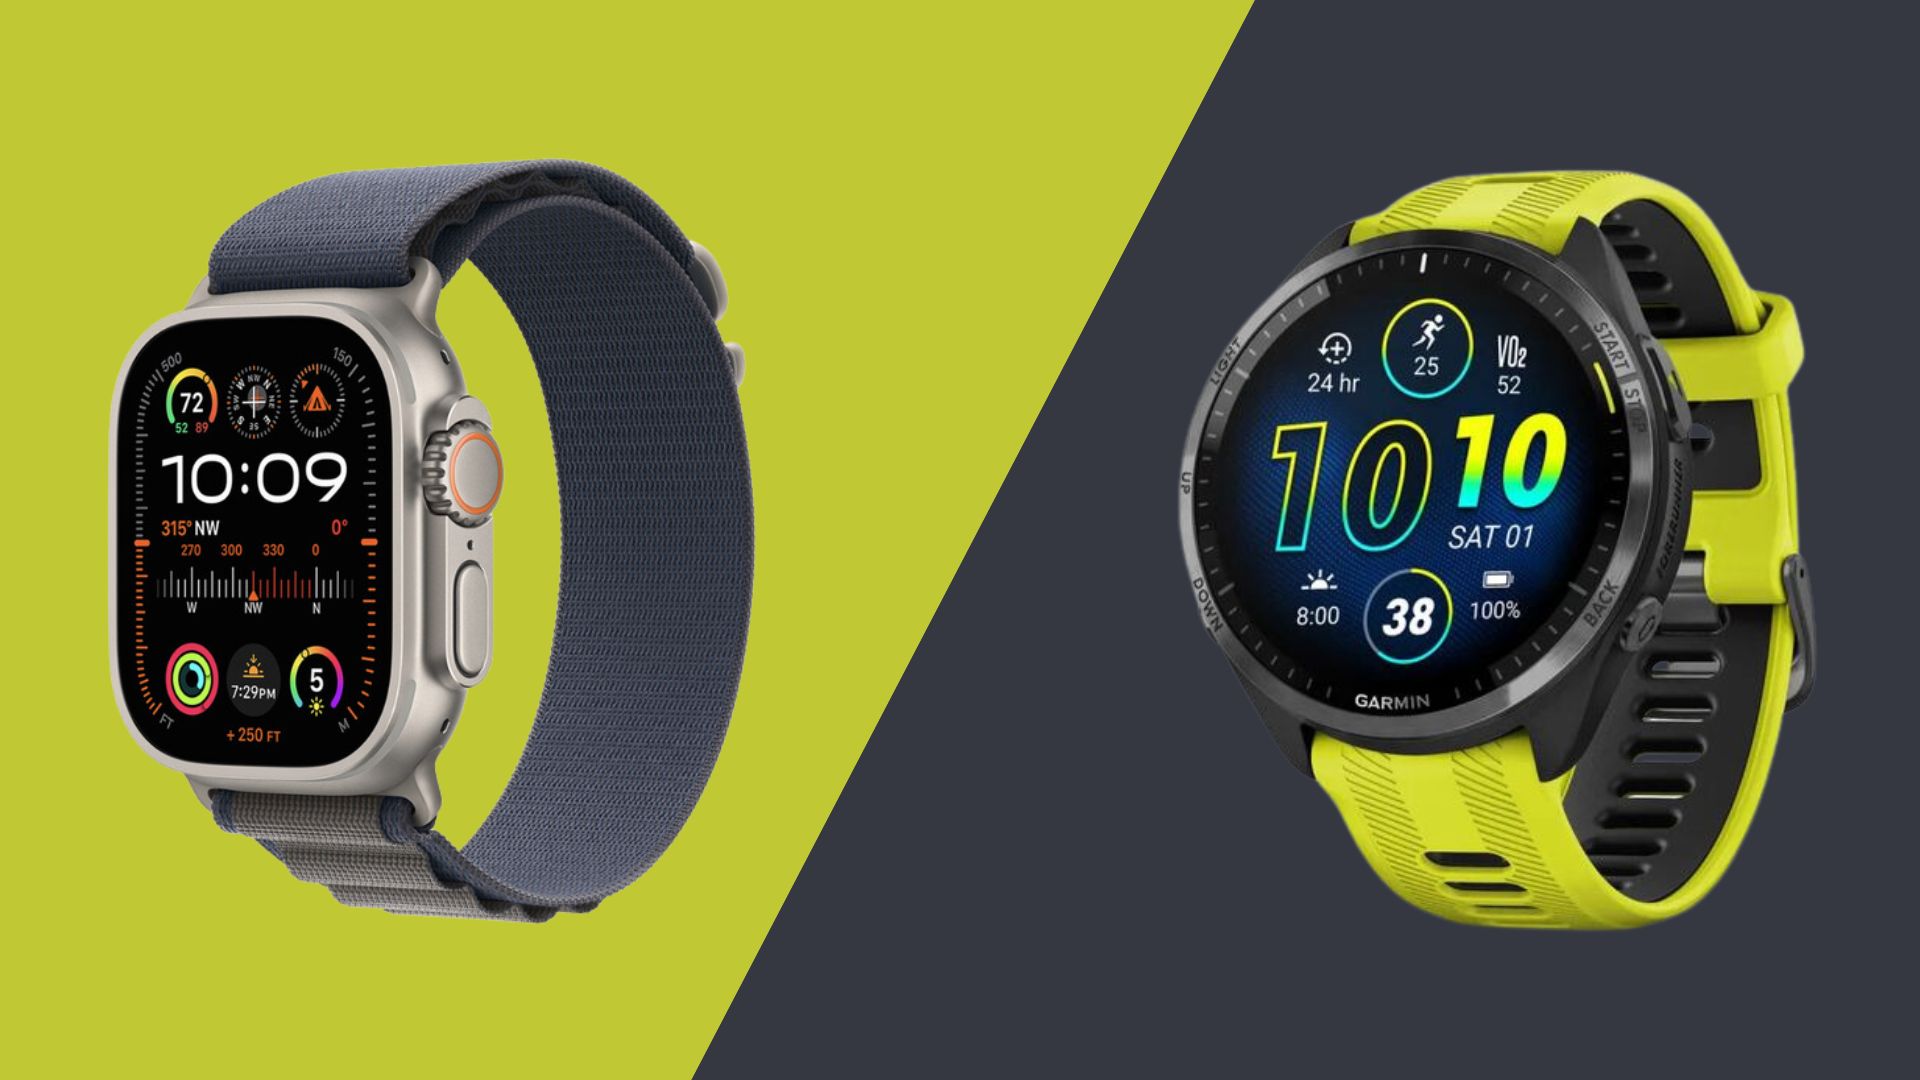 Apple Watch vs Garmin: Which is best for Apple Fitness Plus, workout tracking and beyond?